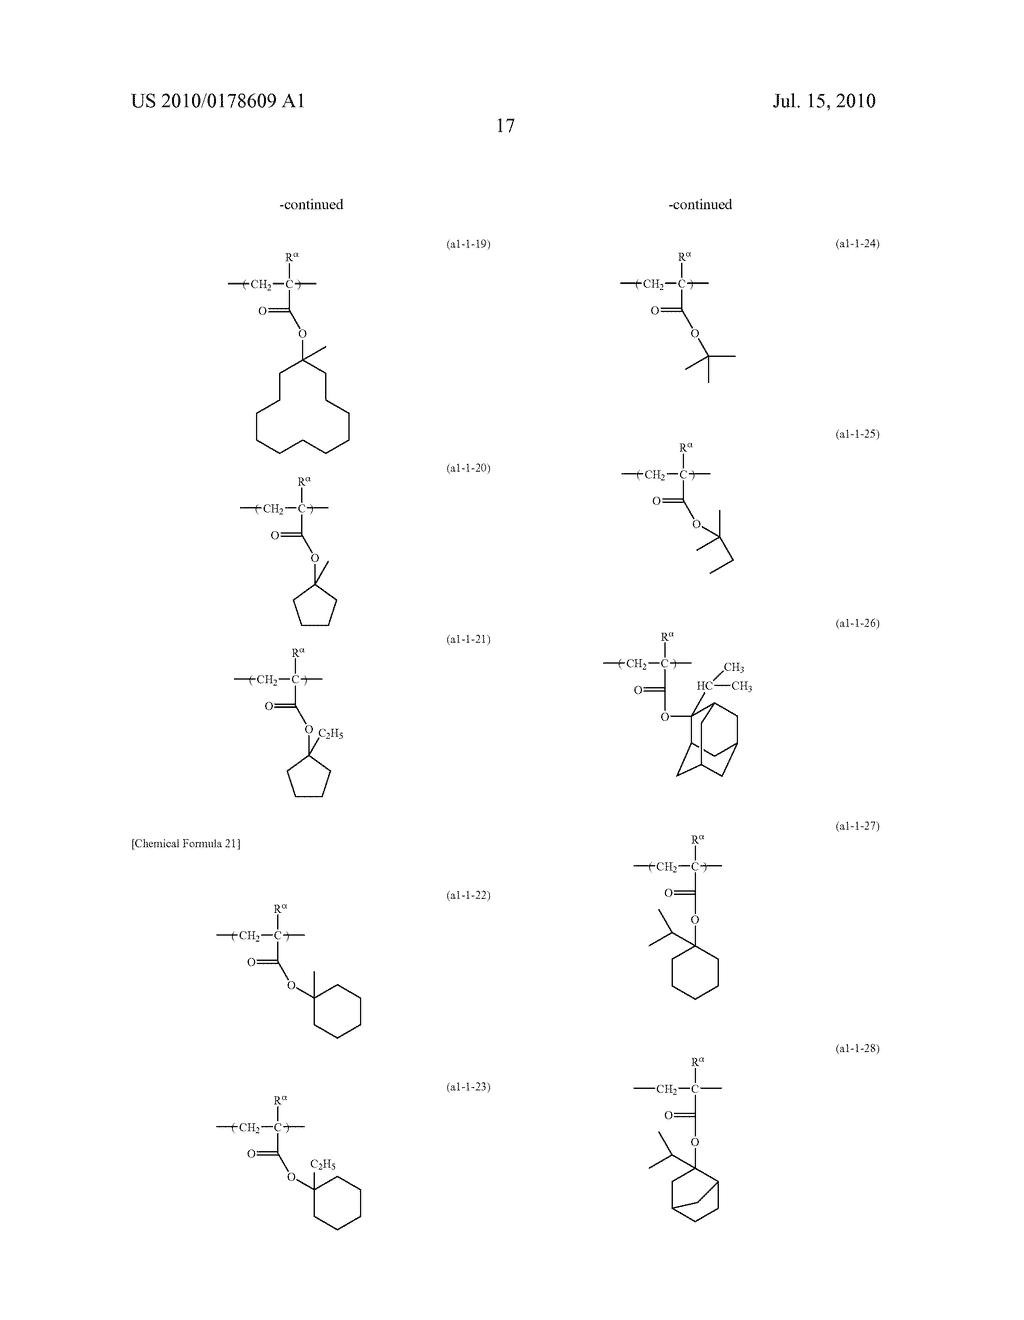 RESIST COMPOSITION, METHOD OF FORMING RESIST PATTERN, POLYMERIC COMPOUND, AND COMPOUND - diagram, schematic, and image 18